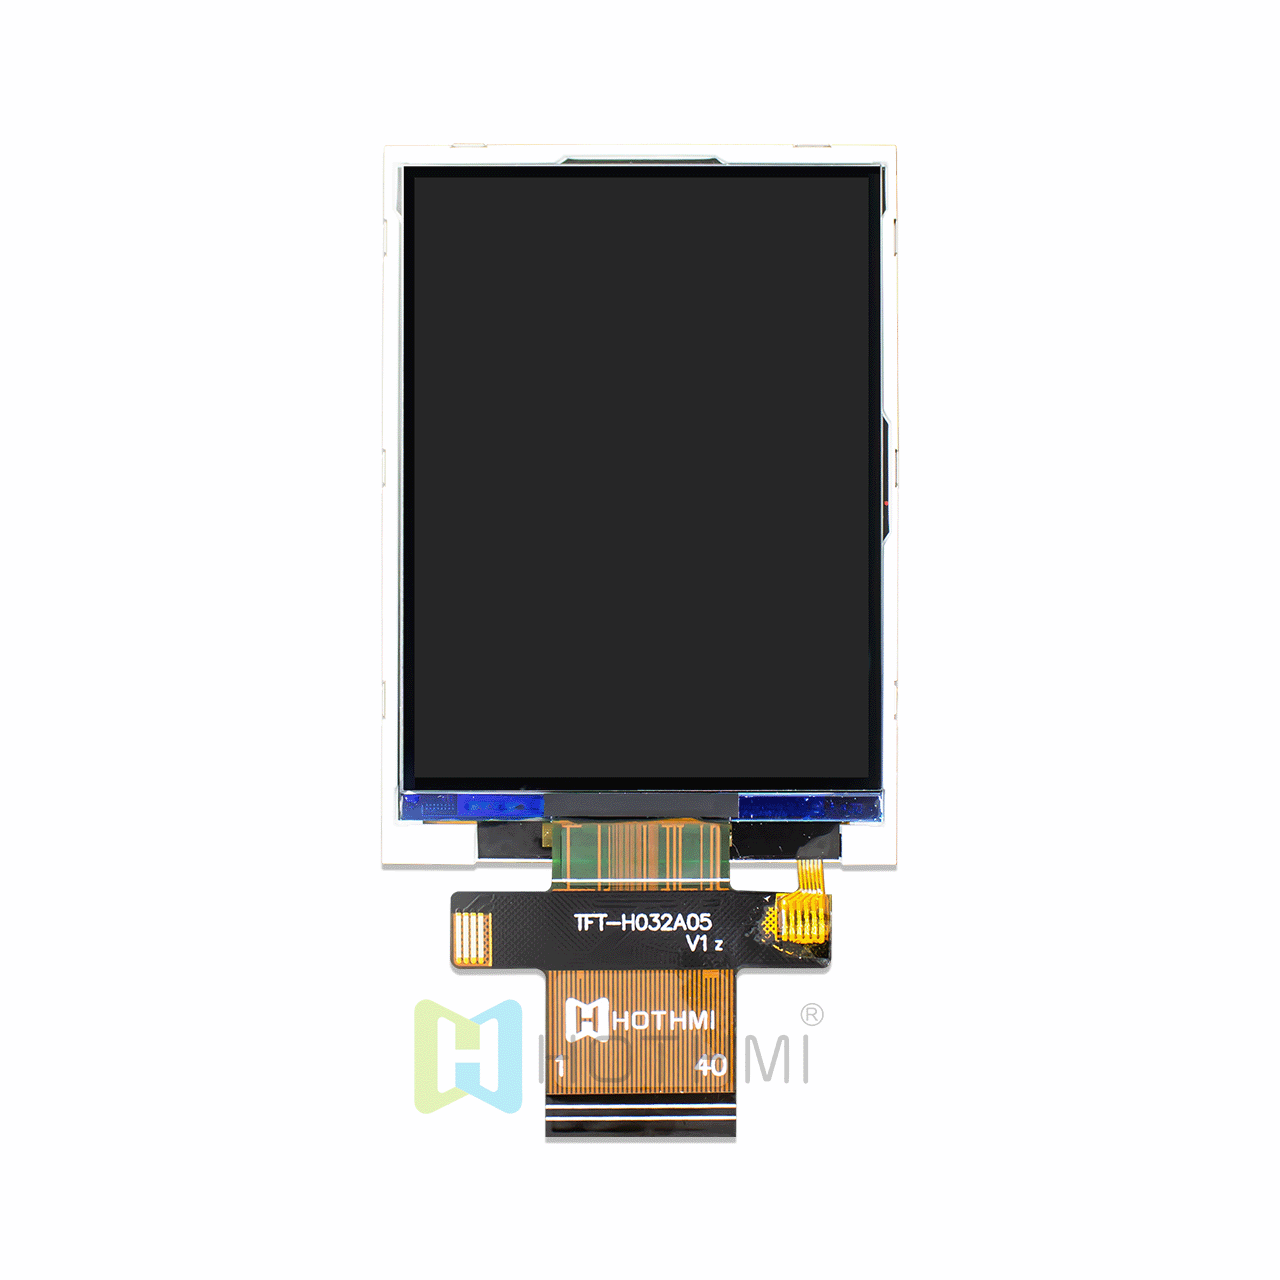 3.2-inch TFT LCD module/240x320 dot matrix color screen module/SPI interface/ST7789 with Android